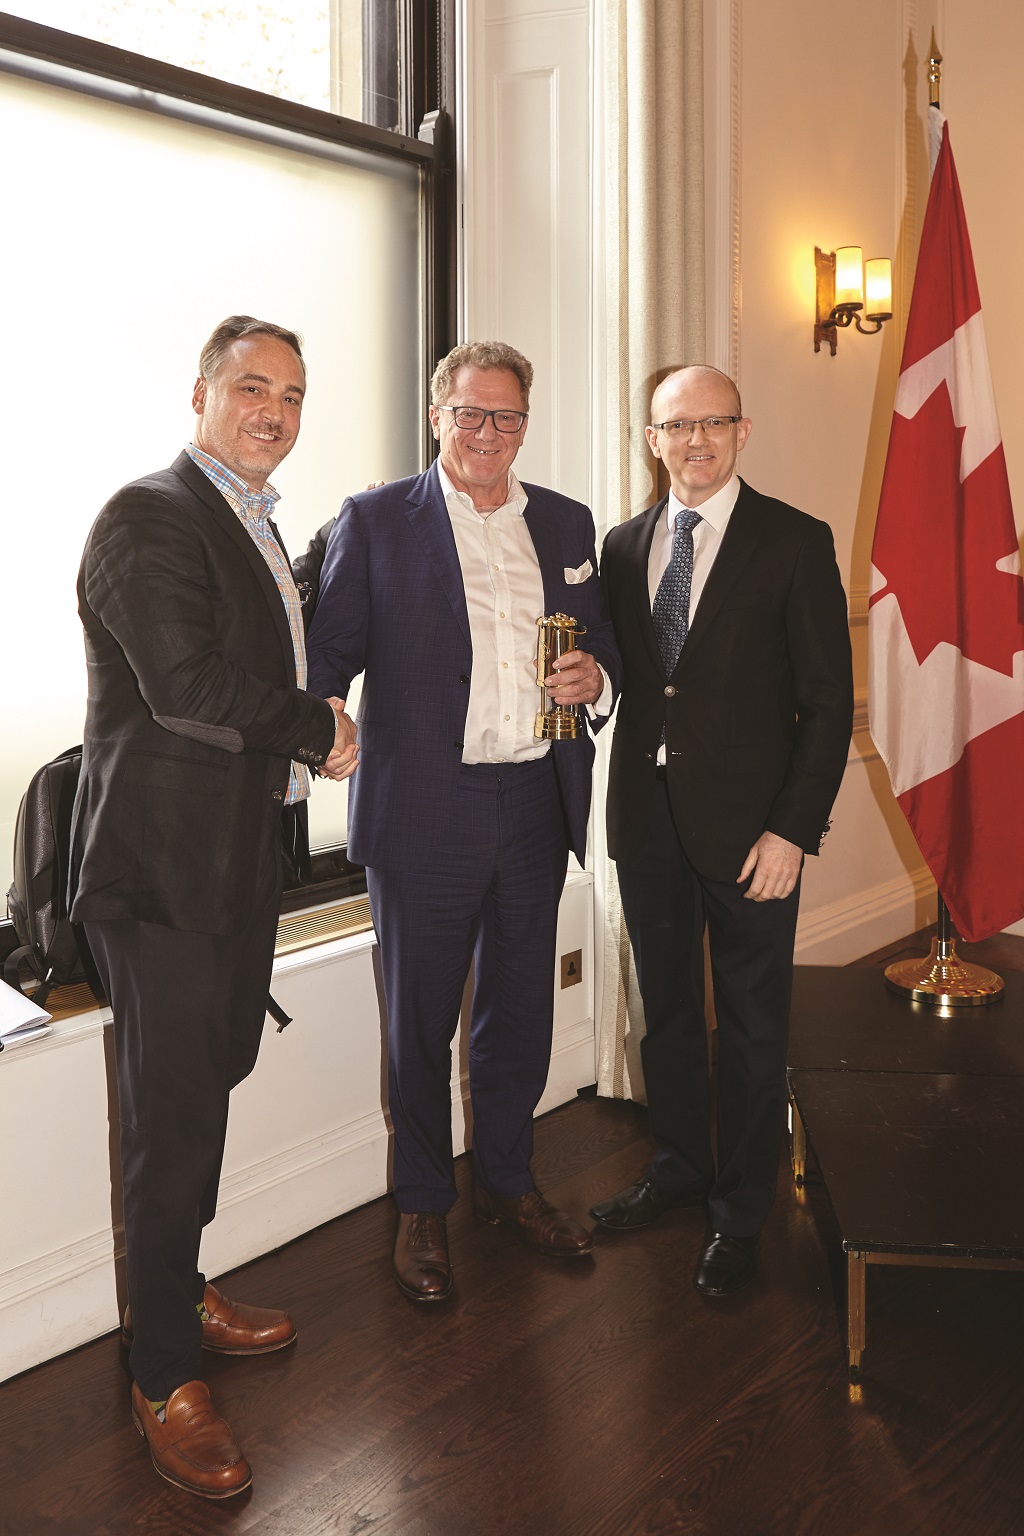 From left: Anthony Vaccaro, group publisher, The Northern Miner; Nicholas Mather, CEO, SolGold, holding his 2018 Northern Miner ‘Mining Person of the Year’ award; and John Cumming, editor-in-chief, The Northern Miner. Photo by Martina Lang for The Northern Miner.